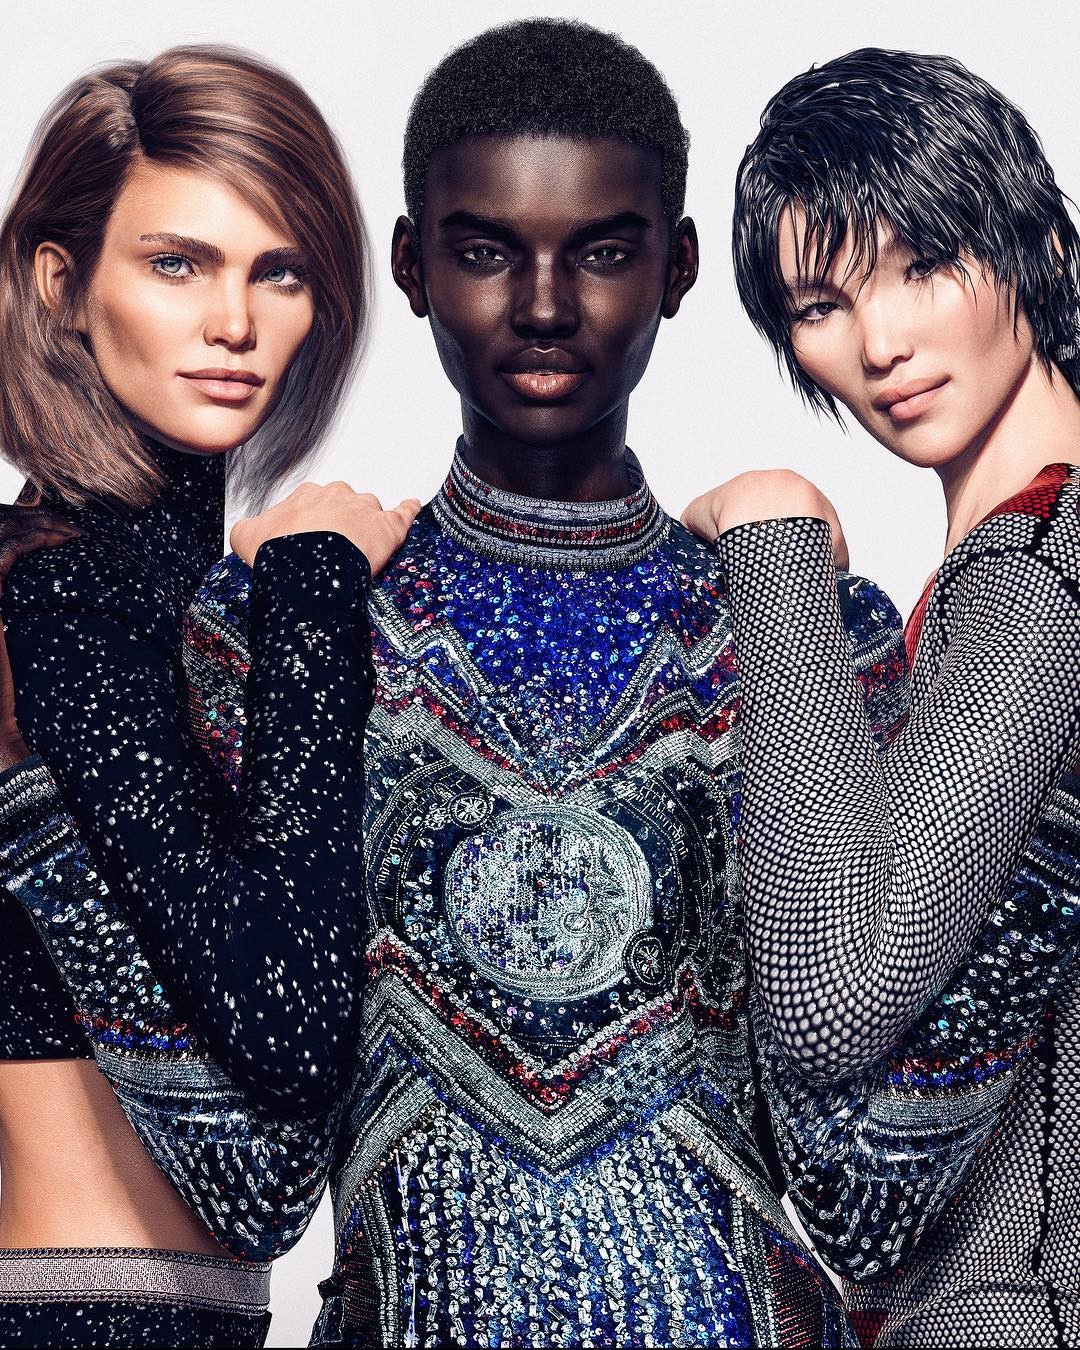 The French fashion brand Balmain has created a line-up of three virtual models, Margot (left), Shudu (centre) – who has almost 140,000 followers on Instagram – and Zhi to show its latest range of designs. Photo: Instagram @balmain